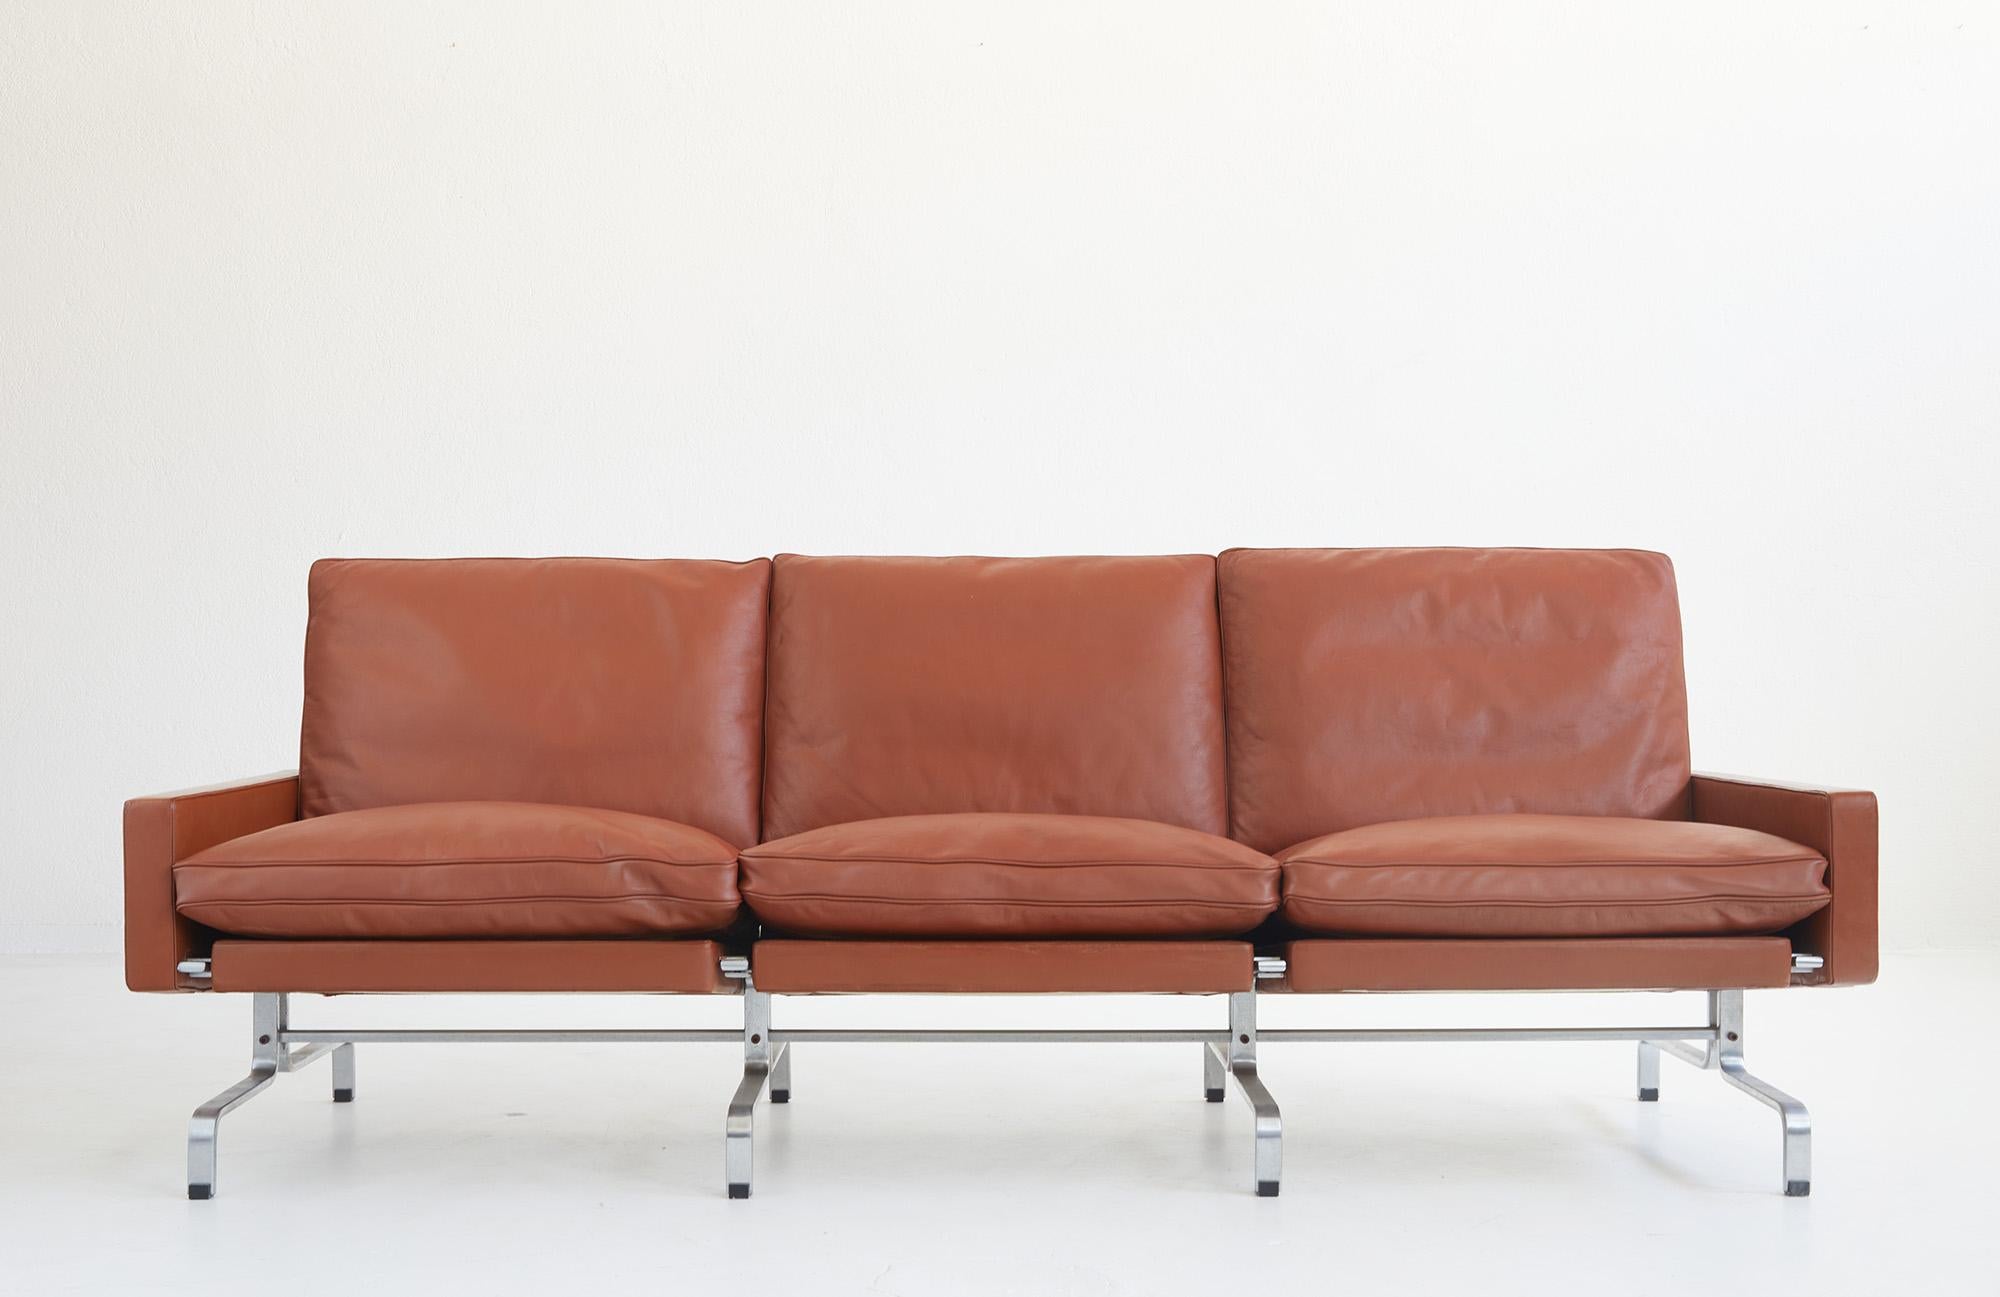 Iconic PK31 three-seater leather sofa by Poul Kjærholm, EKC Denmark 1958.

This sofa is from the first edition produced by E.Kold Christensen until Fritz Hansen takes over the production in 1970.

The heavy and high quality brushed steel structure